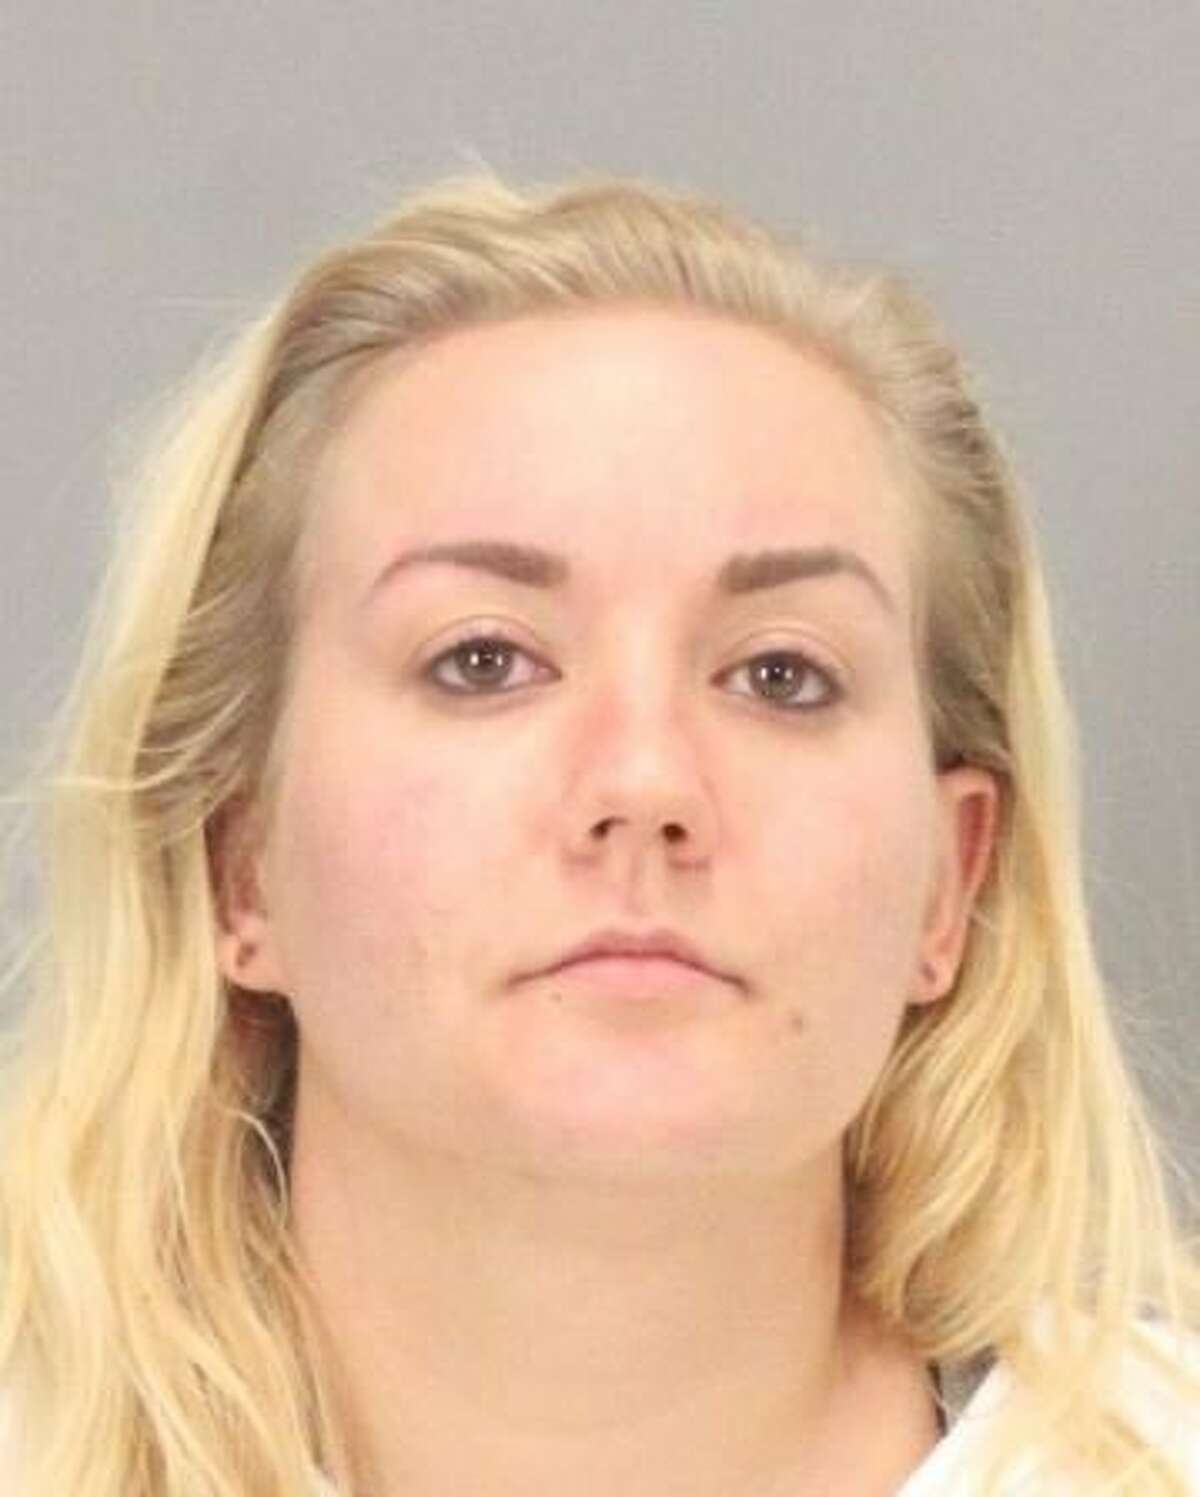 Joanna Mae Macy-Rogers, 23, of San Jose, who was booked into Santa Clara County Jail on Thursday, Feb. 14, 2019 on suspicion of attempted murder on a peace officer, carjacking, kidnapping and shooting at an occupied vehicle.